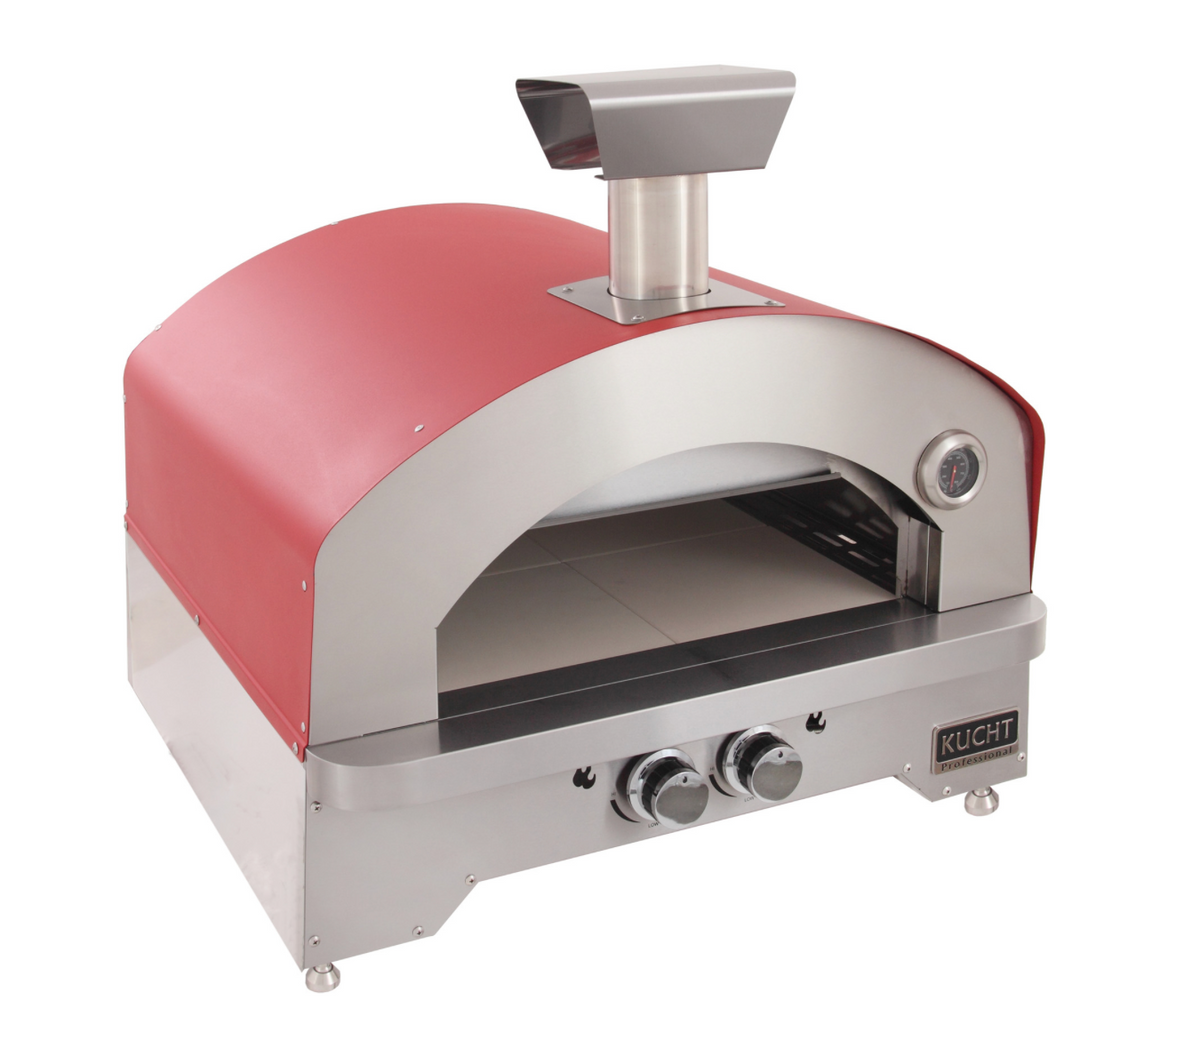 Kucht Professional Napoli Gas Fired Pizza Oven